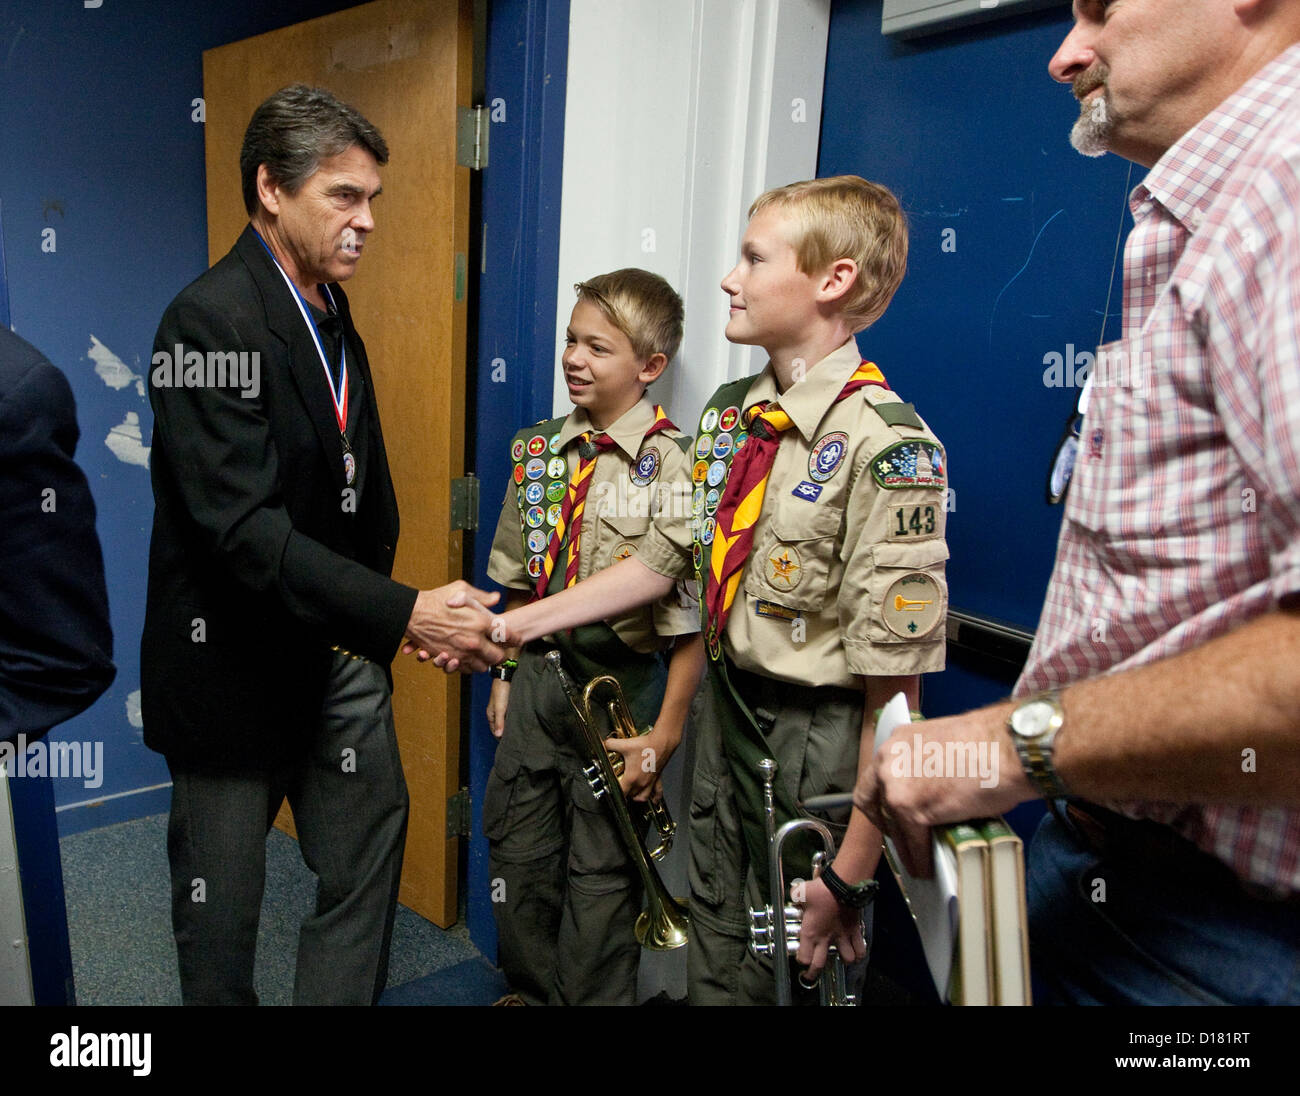 Texas Governor Rick Perry, greets young boy scouts at Veteran's Day celebration at Dime Box, Texas school. Stock Photo